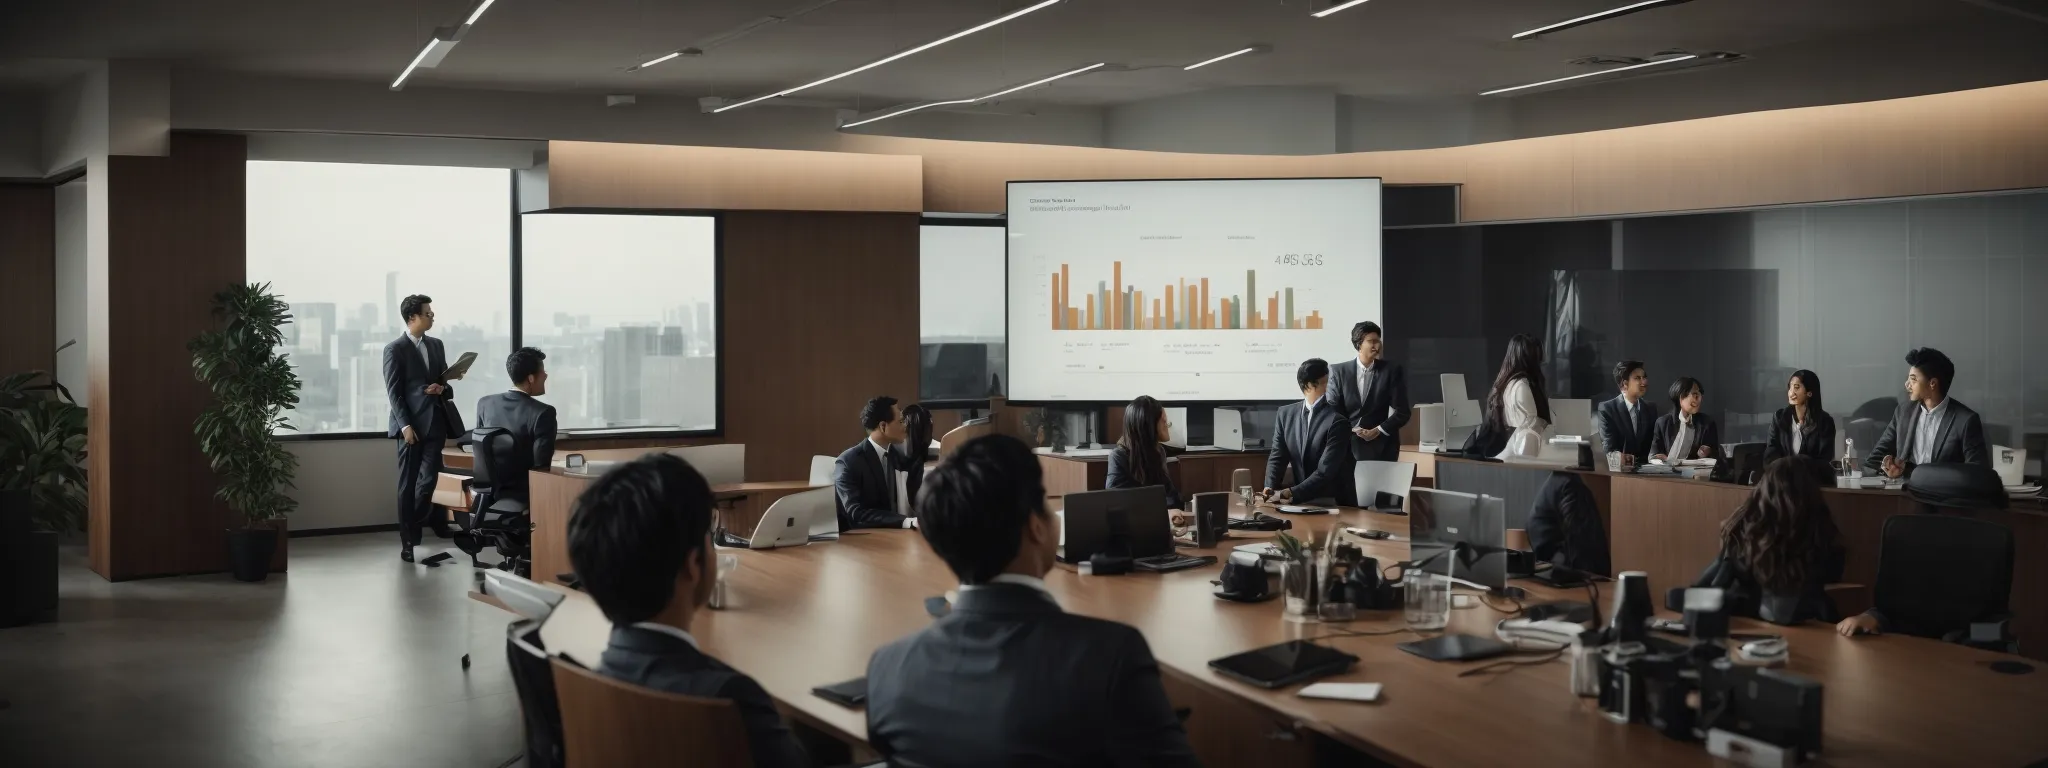 a dynamic office setting with a meeting in progress and a visible growth chart on a screen.